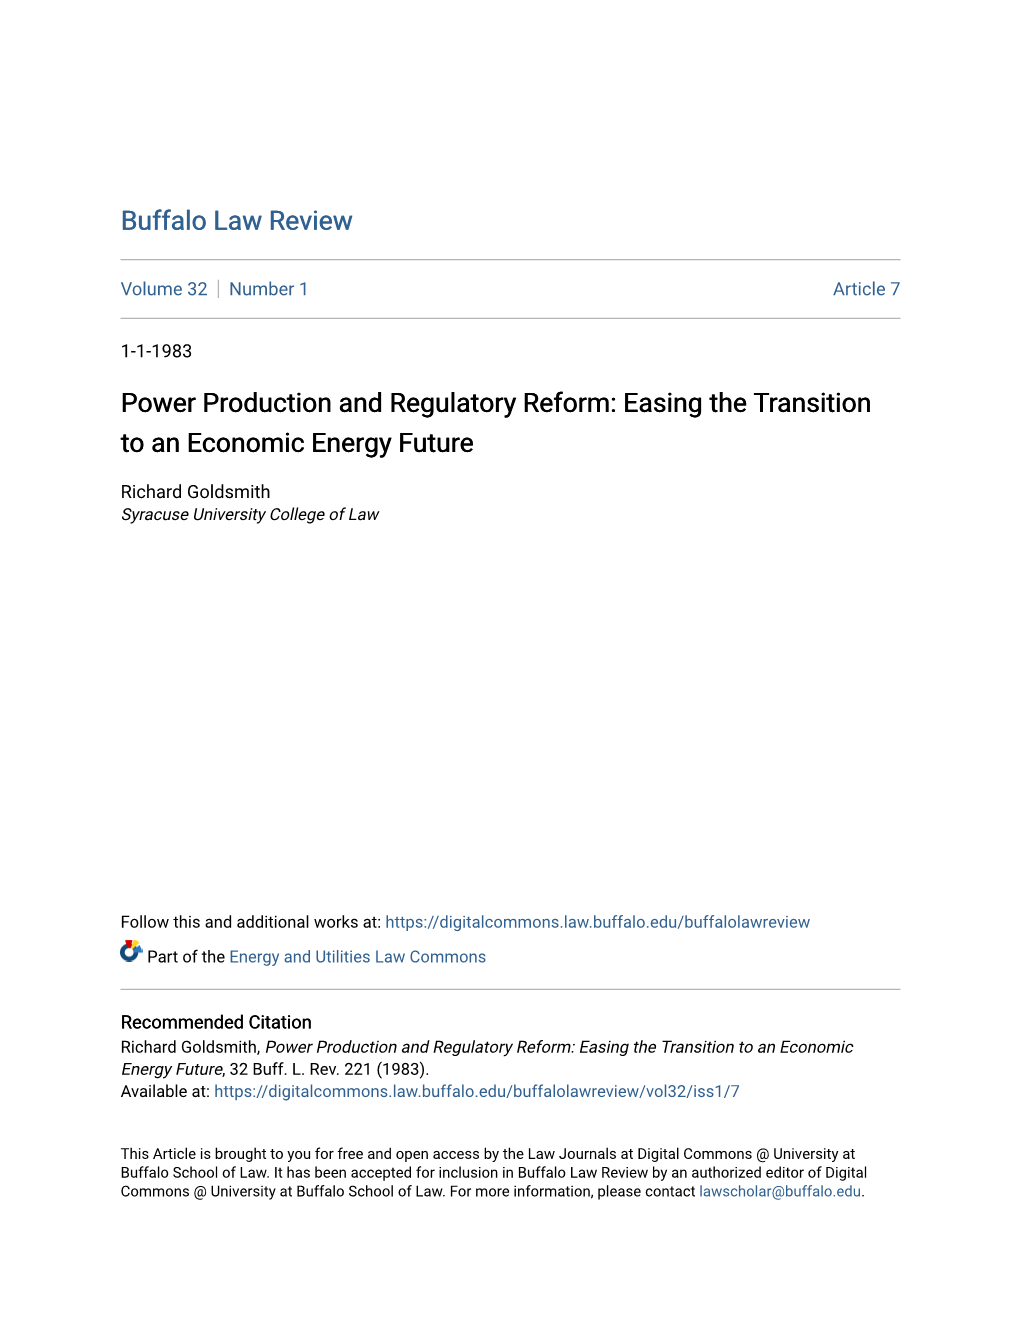 Power Production and Regulatory Reform: Easing the Transition to an Economic Energy Future